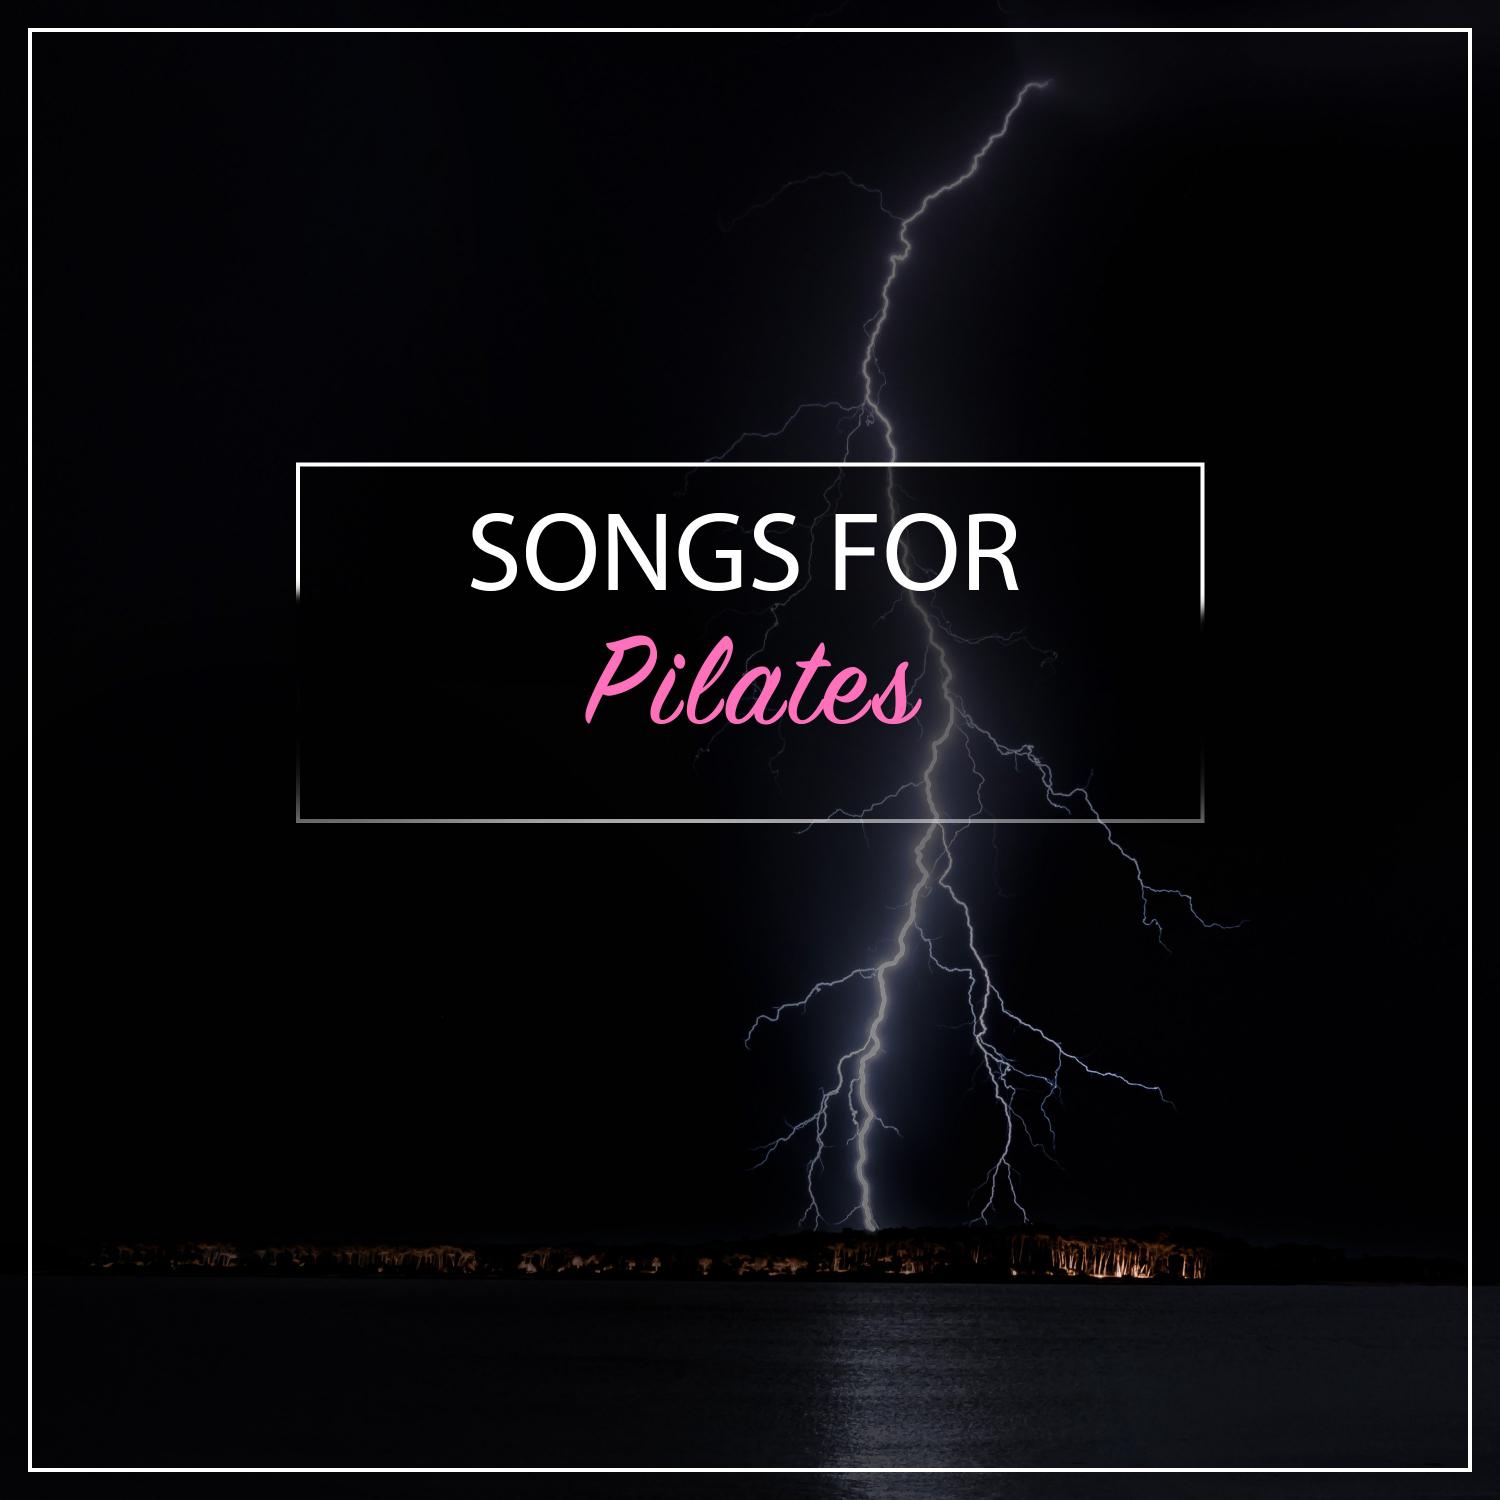 18 Songs for Pilates, Massage or Meditation